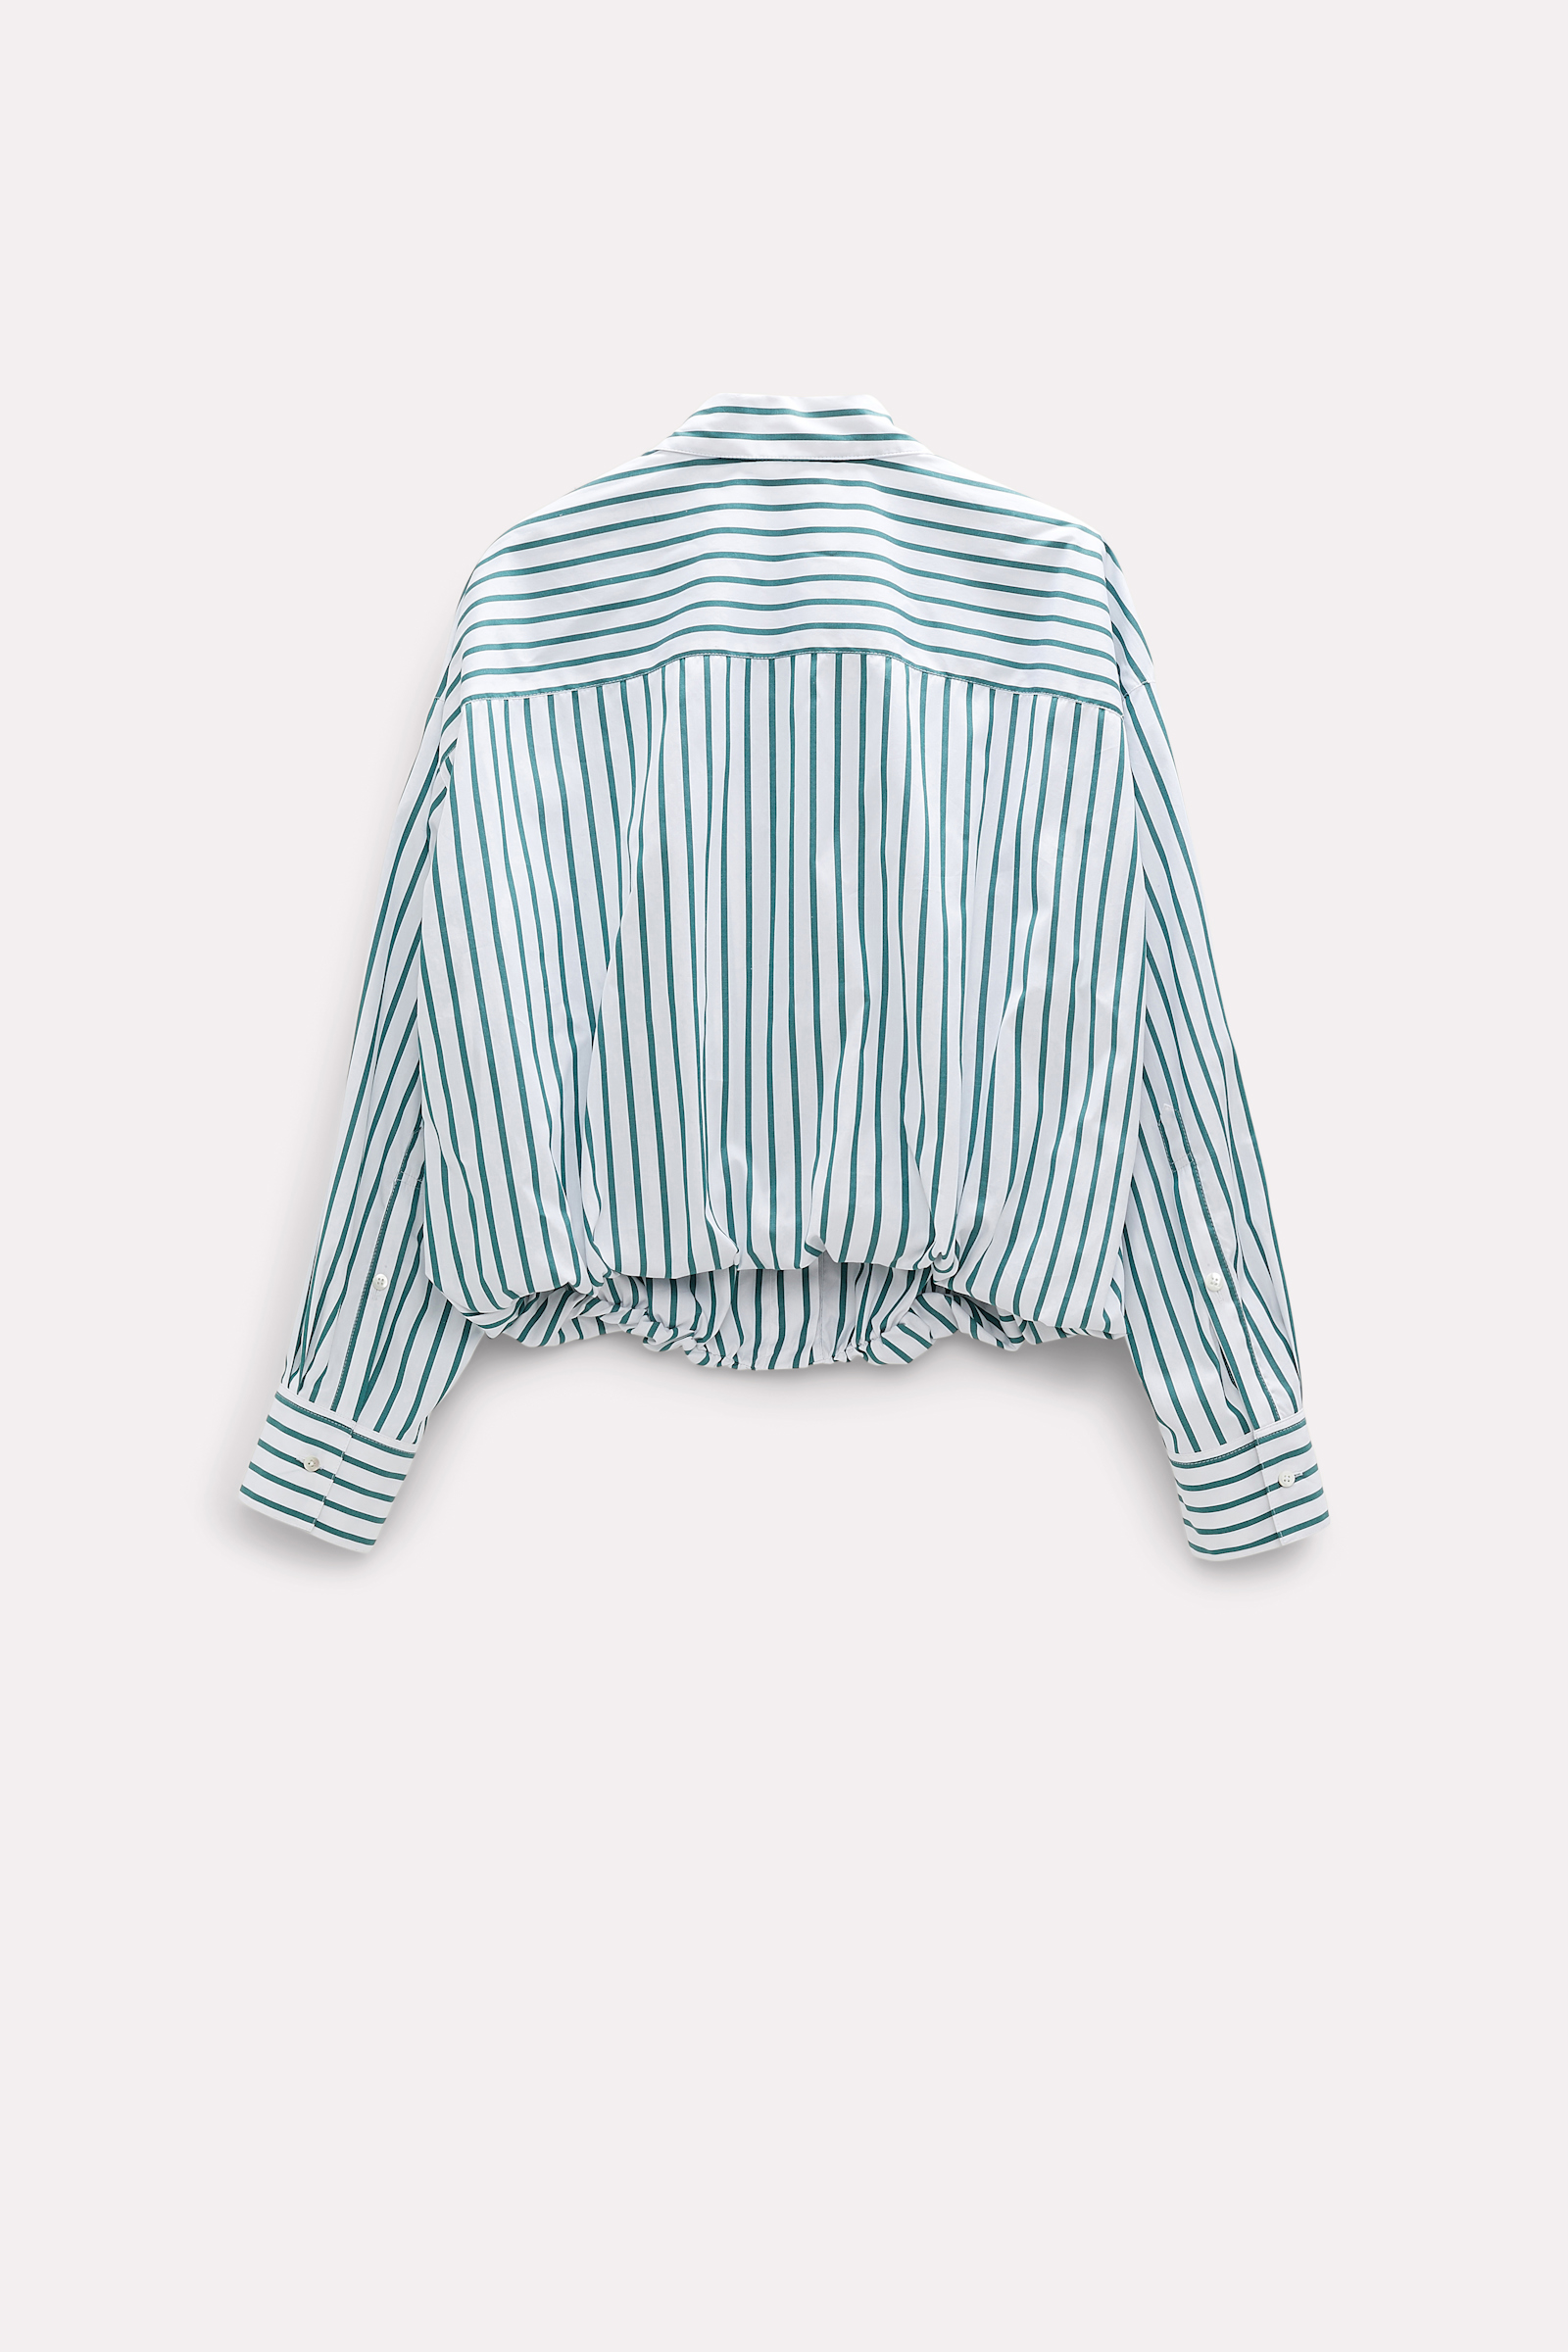 Dorothee Schumacher Striped poplin cropped blouse green and white mix